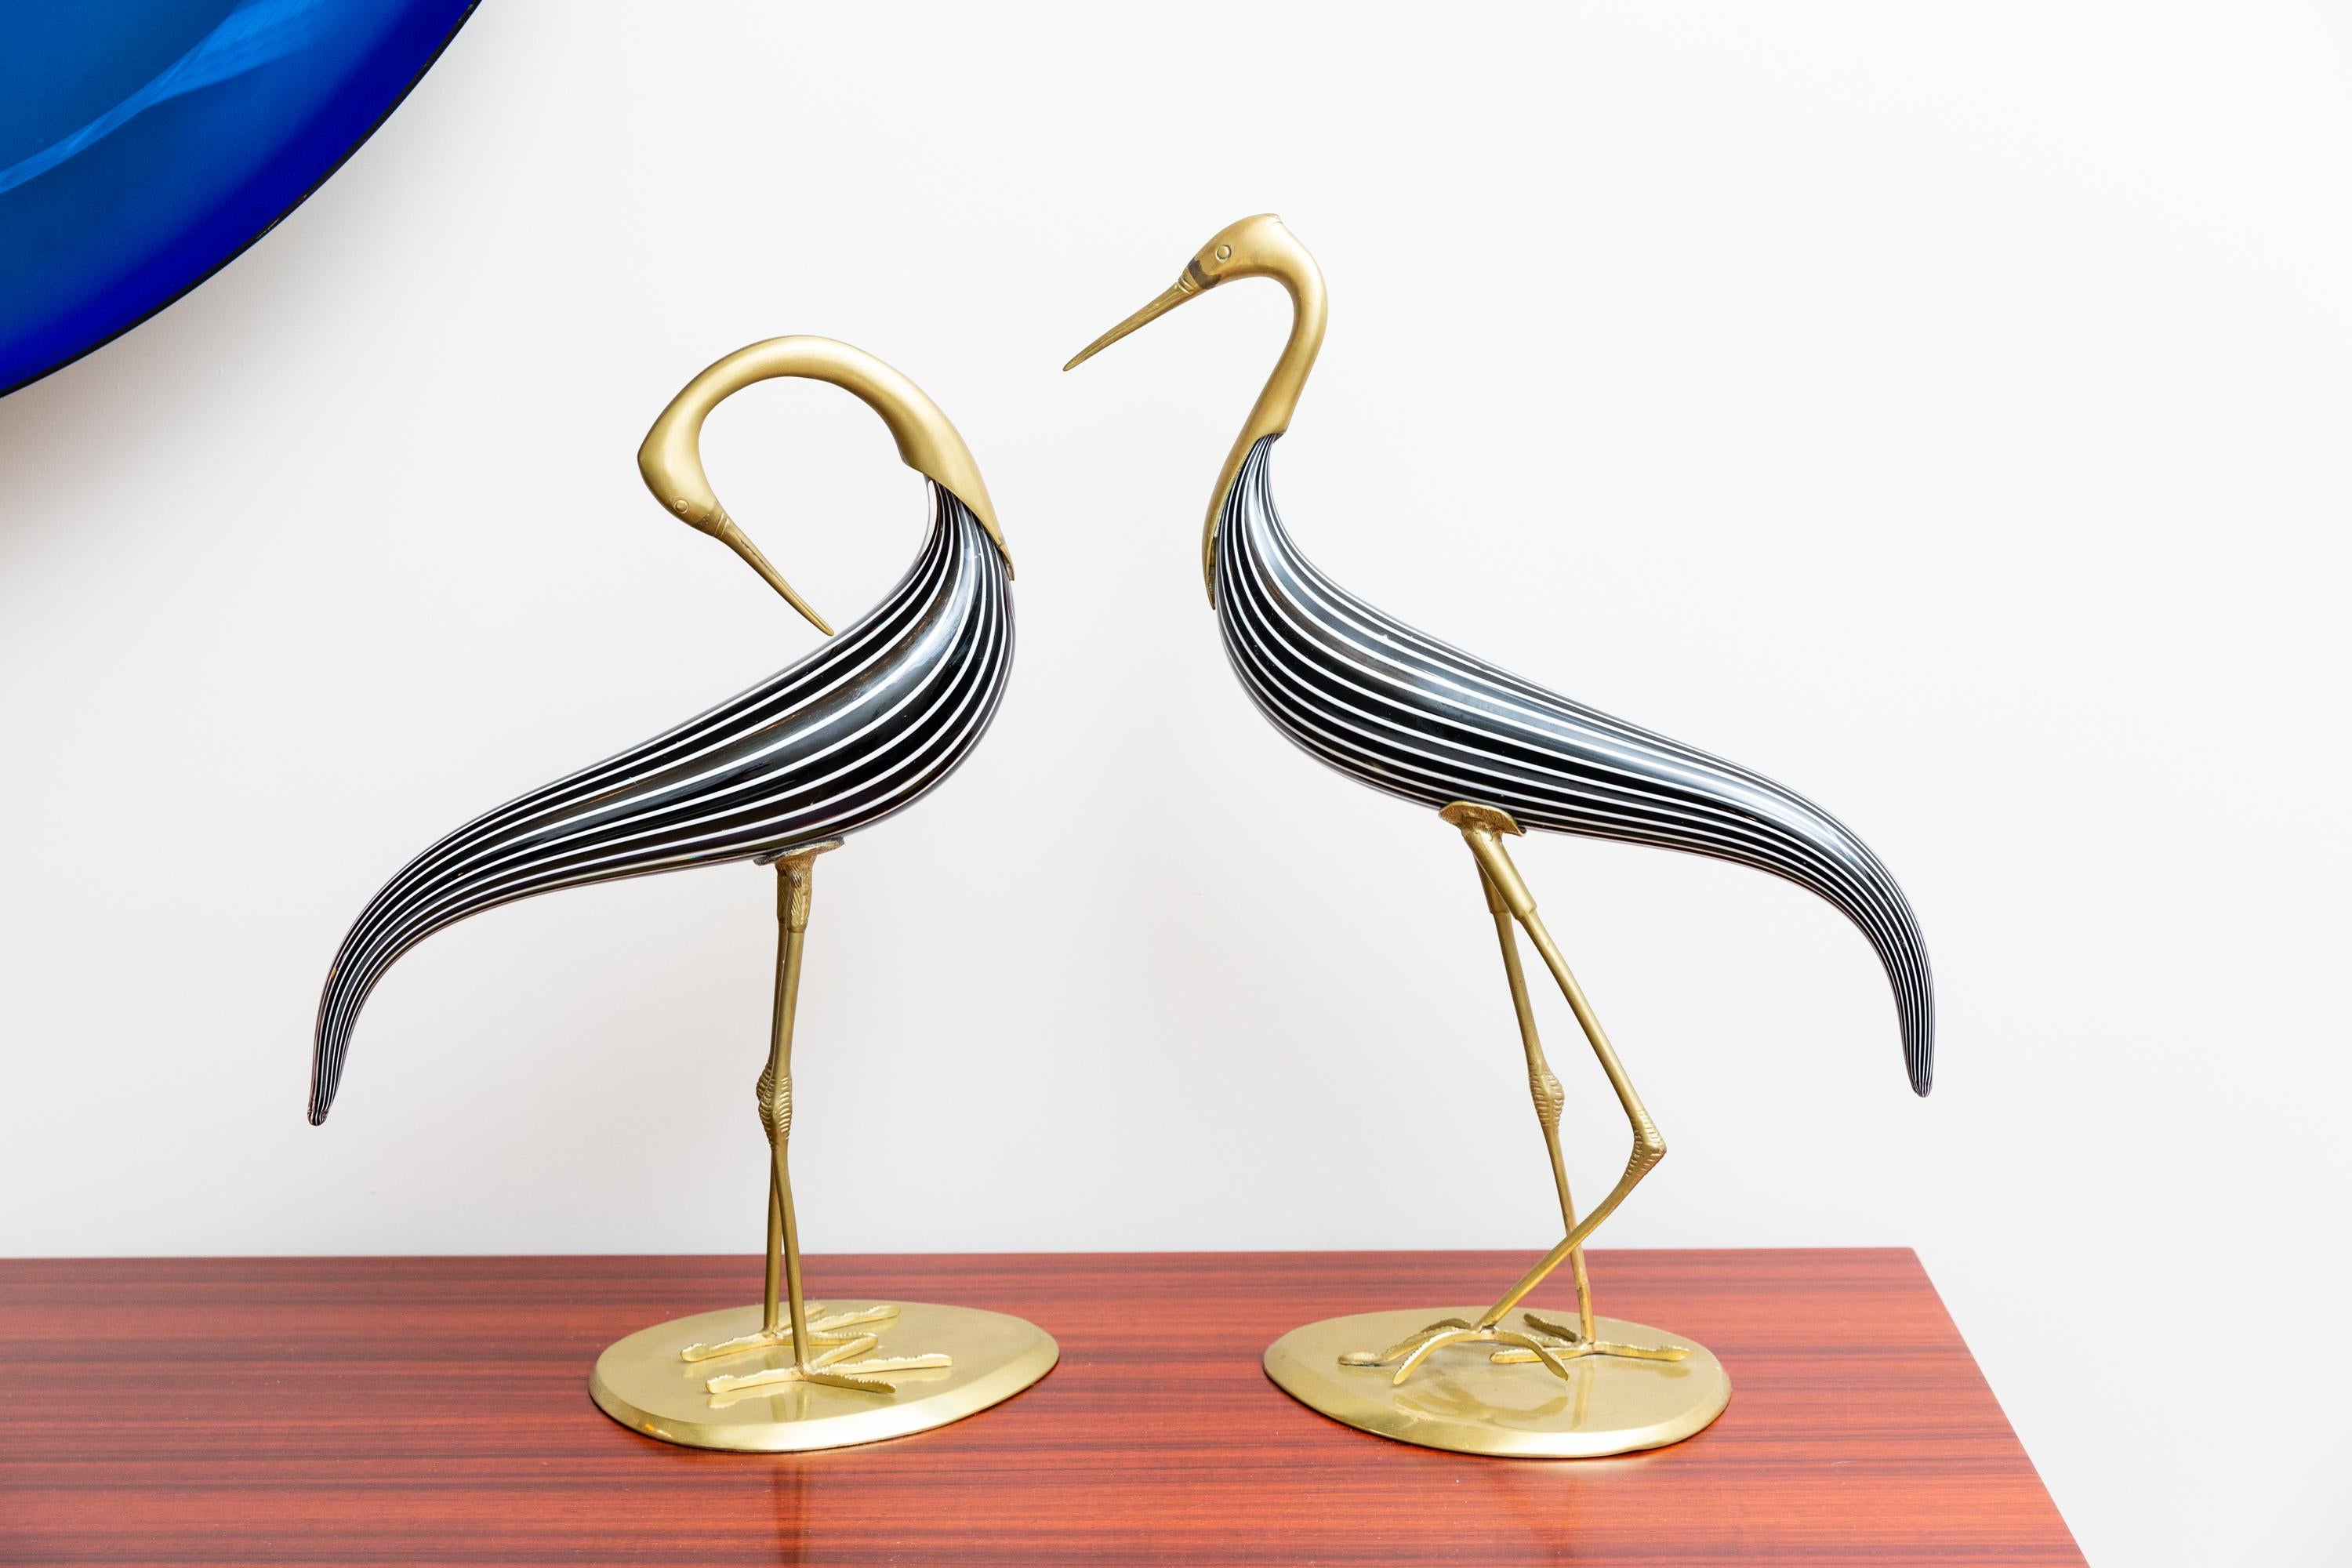 An elegant pair of Herons / Aironi, Murano glass, brass, Italy circa 1970. Solid Murano glass body blown with black and white stripes, mounted on solid brass feet, brass stand, brass head.
Very good condition. Small patination on the brass. Heavy